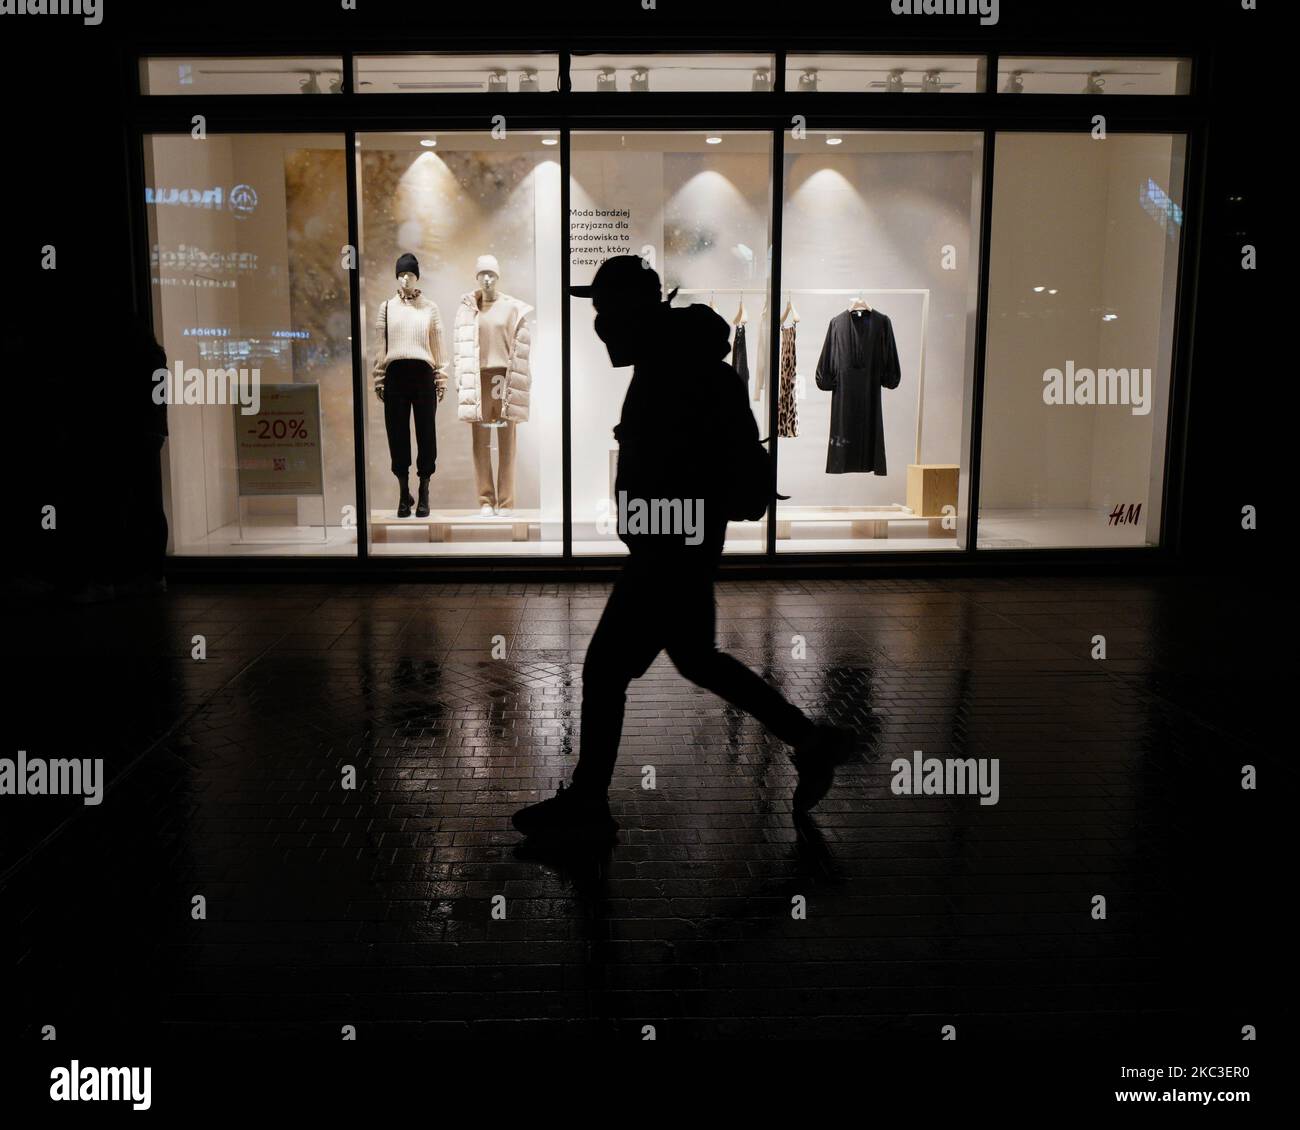 People walk past a shopping window display with mannequins in Warsaw, Poland on November 6, 2020. A partial lockdown will be imposed for two weeks starting on Saturday across the entire country. Daily cases of coronavirus infections have kept rising in the last two weeks despite restaurants and bars having been closed in addition to implementing distance learning for most grades in schools. To prevent a collapse of the overburdened healthcare system the Prime Minister's office announced new restrictions including the closing of shopping malls, hotels for tourists and mandatory distance learnin Stock Photo